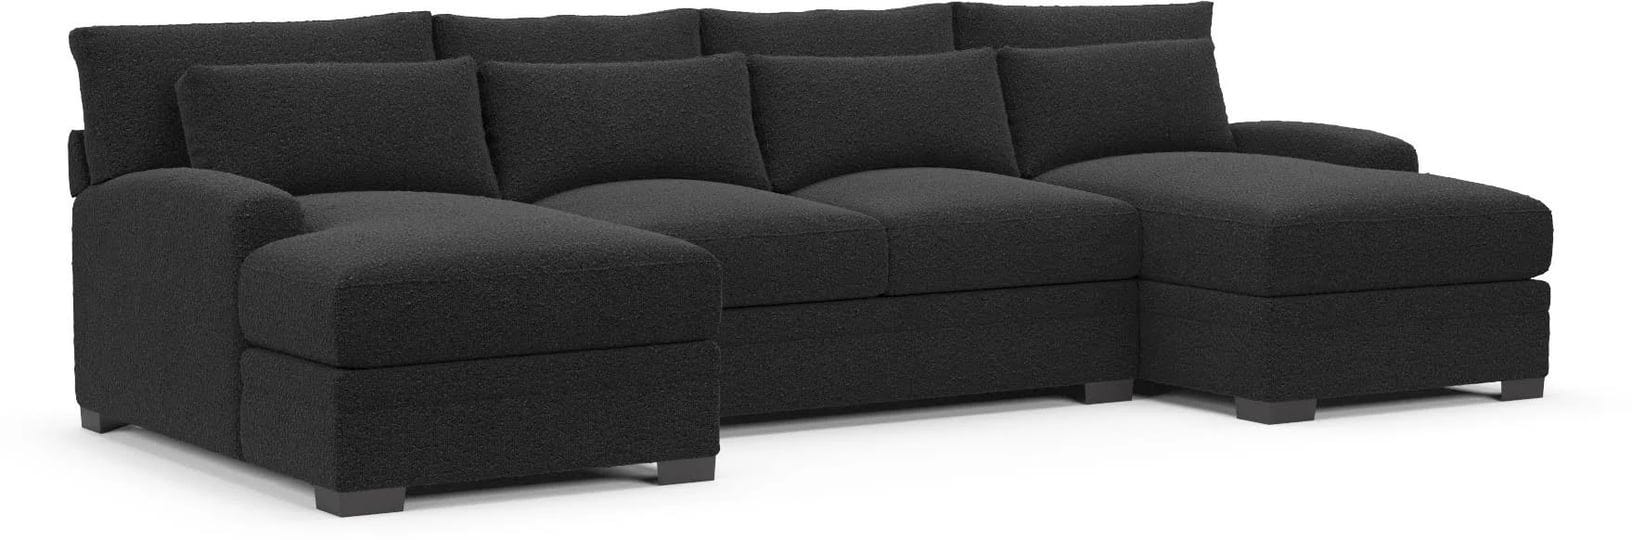 designer-looks-winston-foam-comfort-3-piece-sectional-with-dual-chaise-bloke-obsidian-1